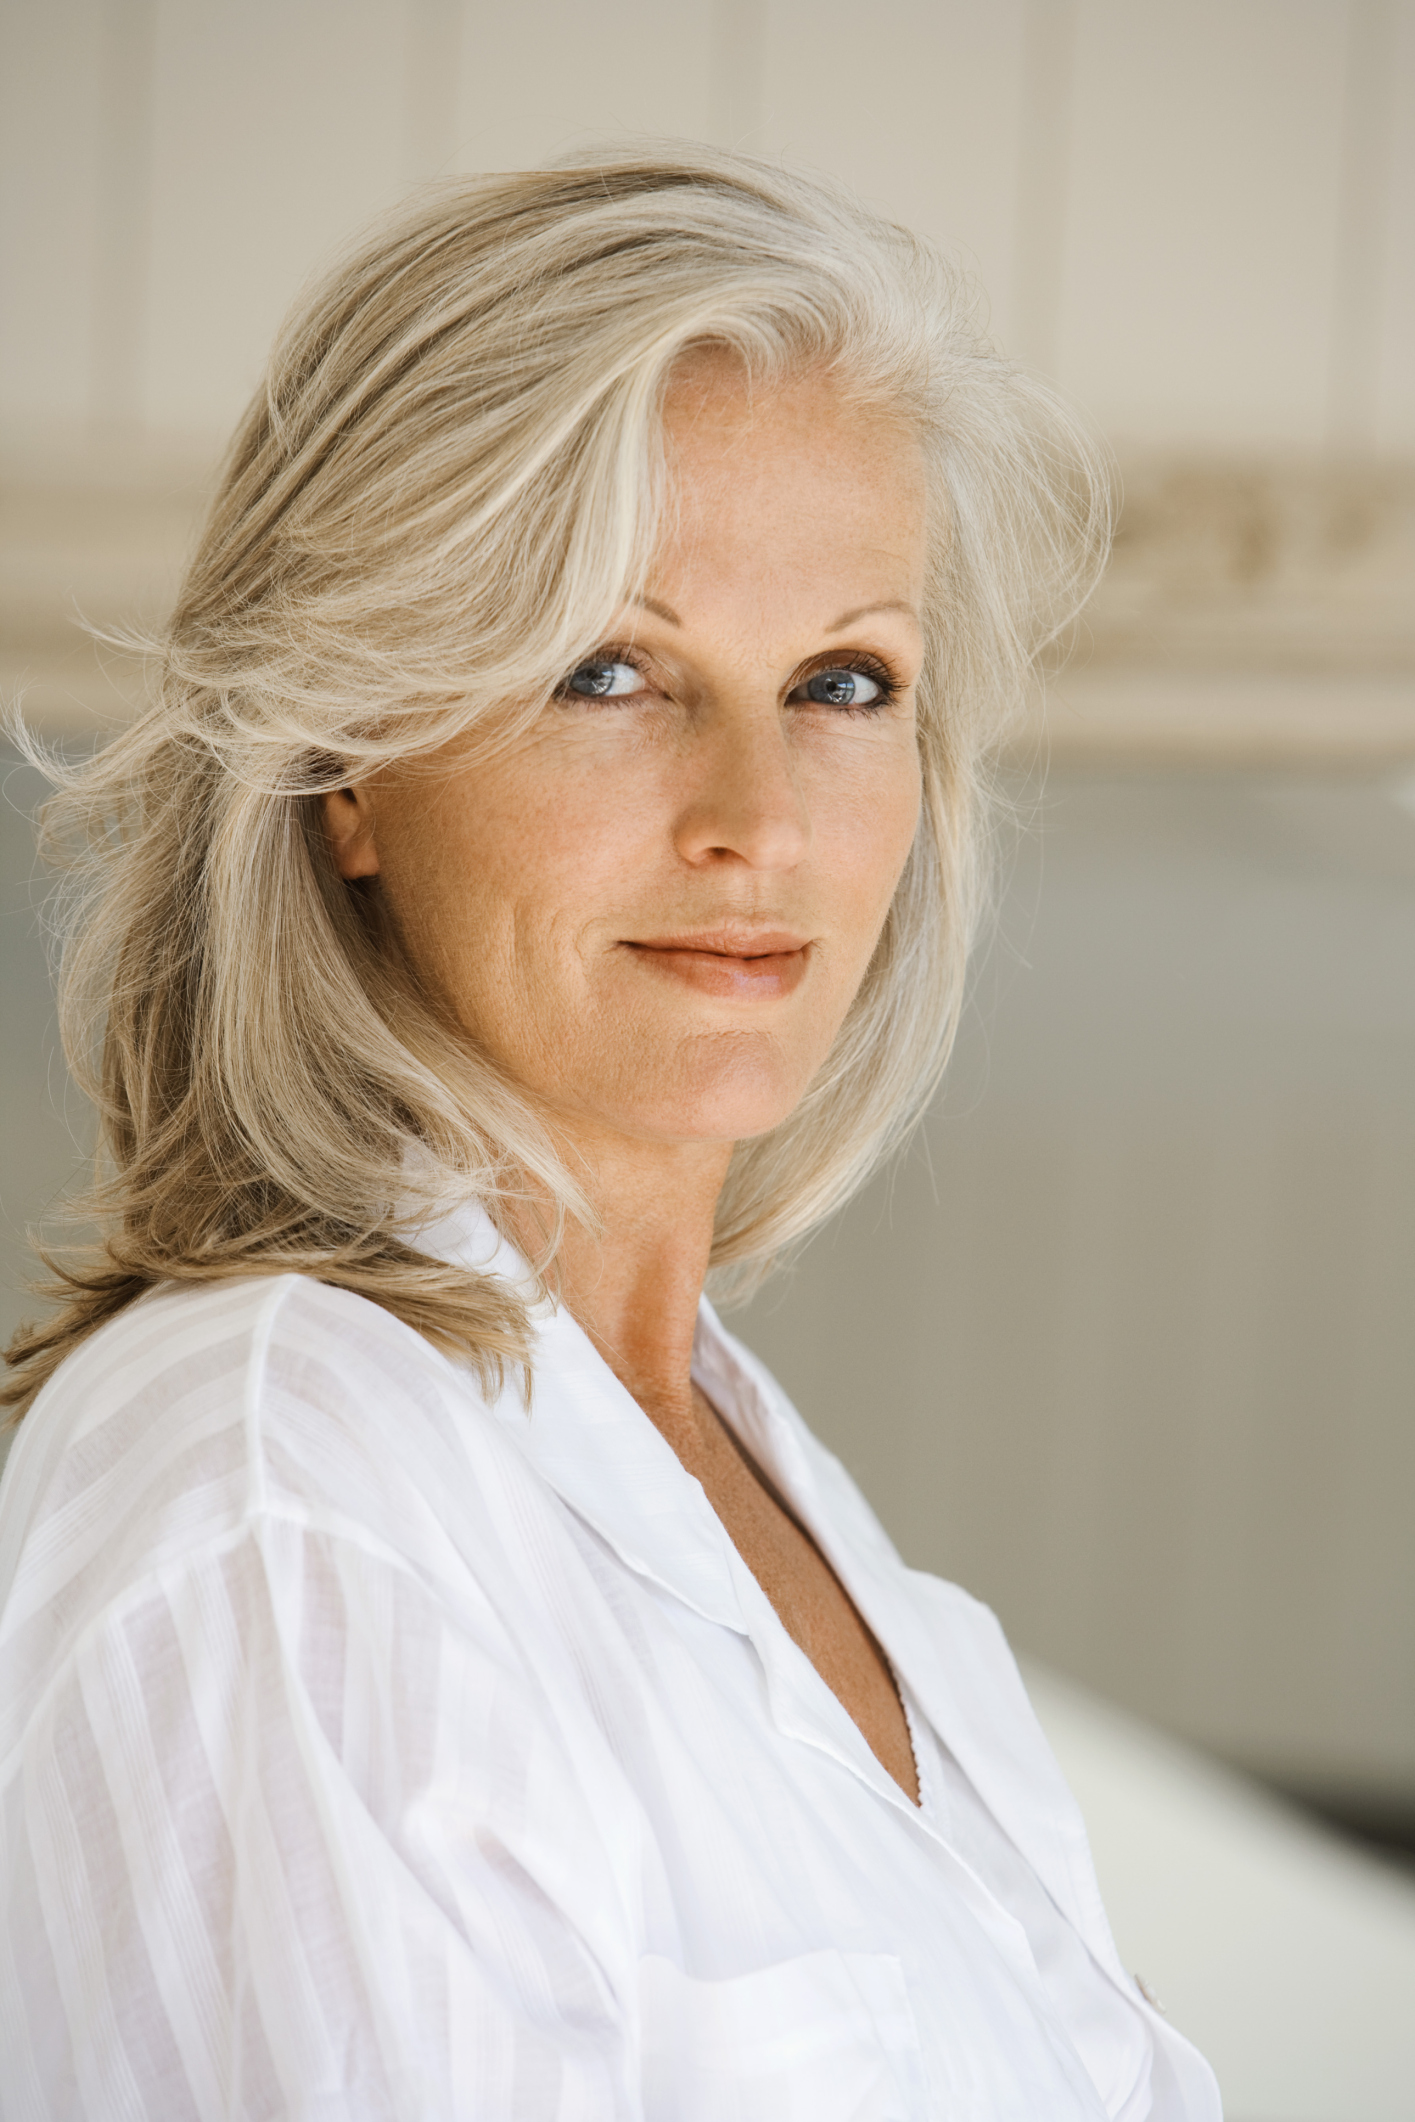 How To Become A Female Model Over 50 Years Old Career Trend